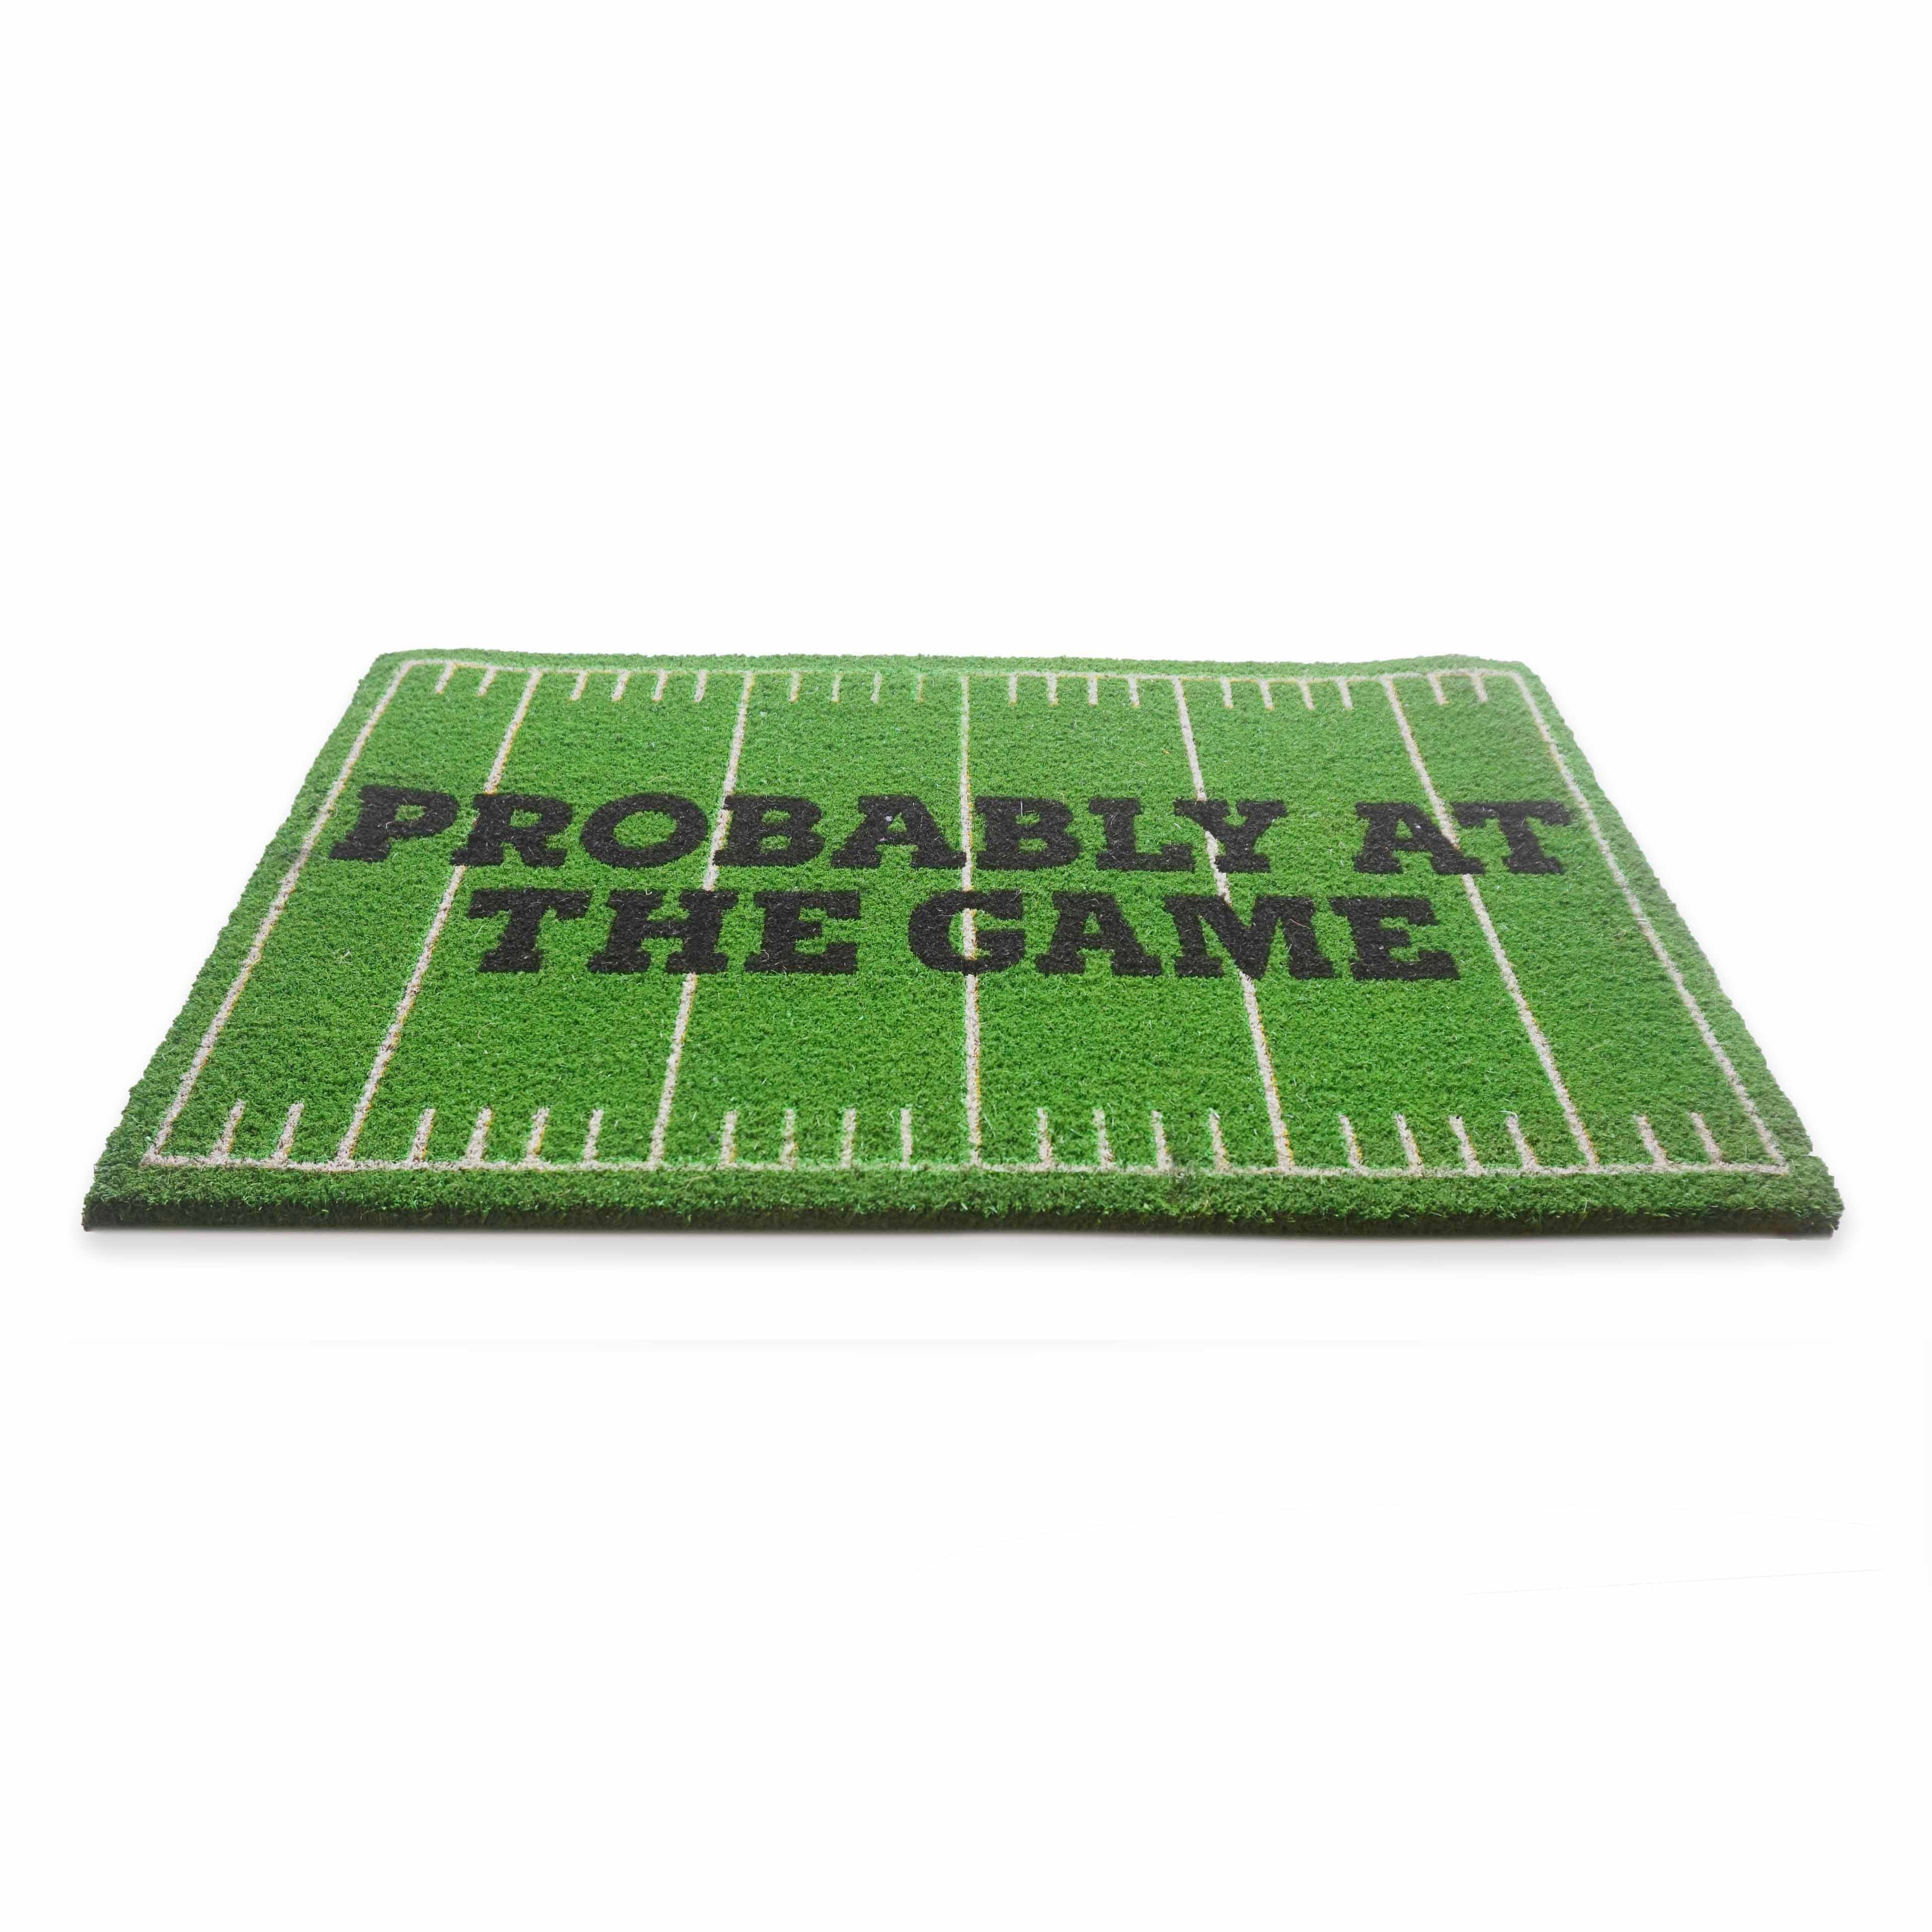 Probably at the Game Doormat by Ashland&#xAE;